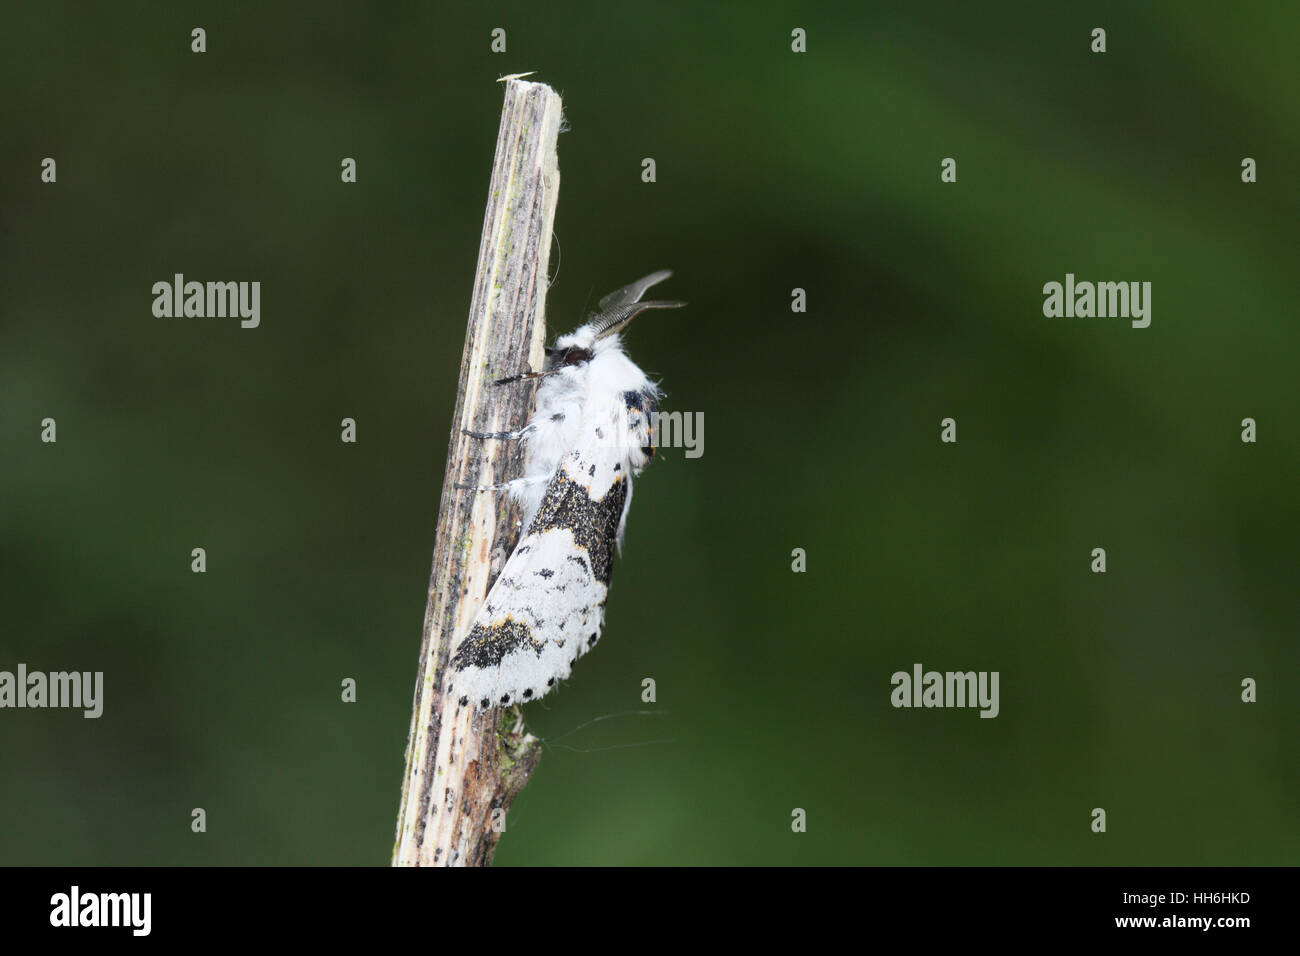 Alder Kitten (Furcula bicuspis), a black and white moth with feathered antennae, perched on a stick against a green background Stock Photo